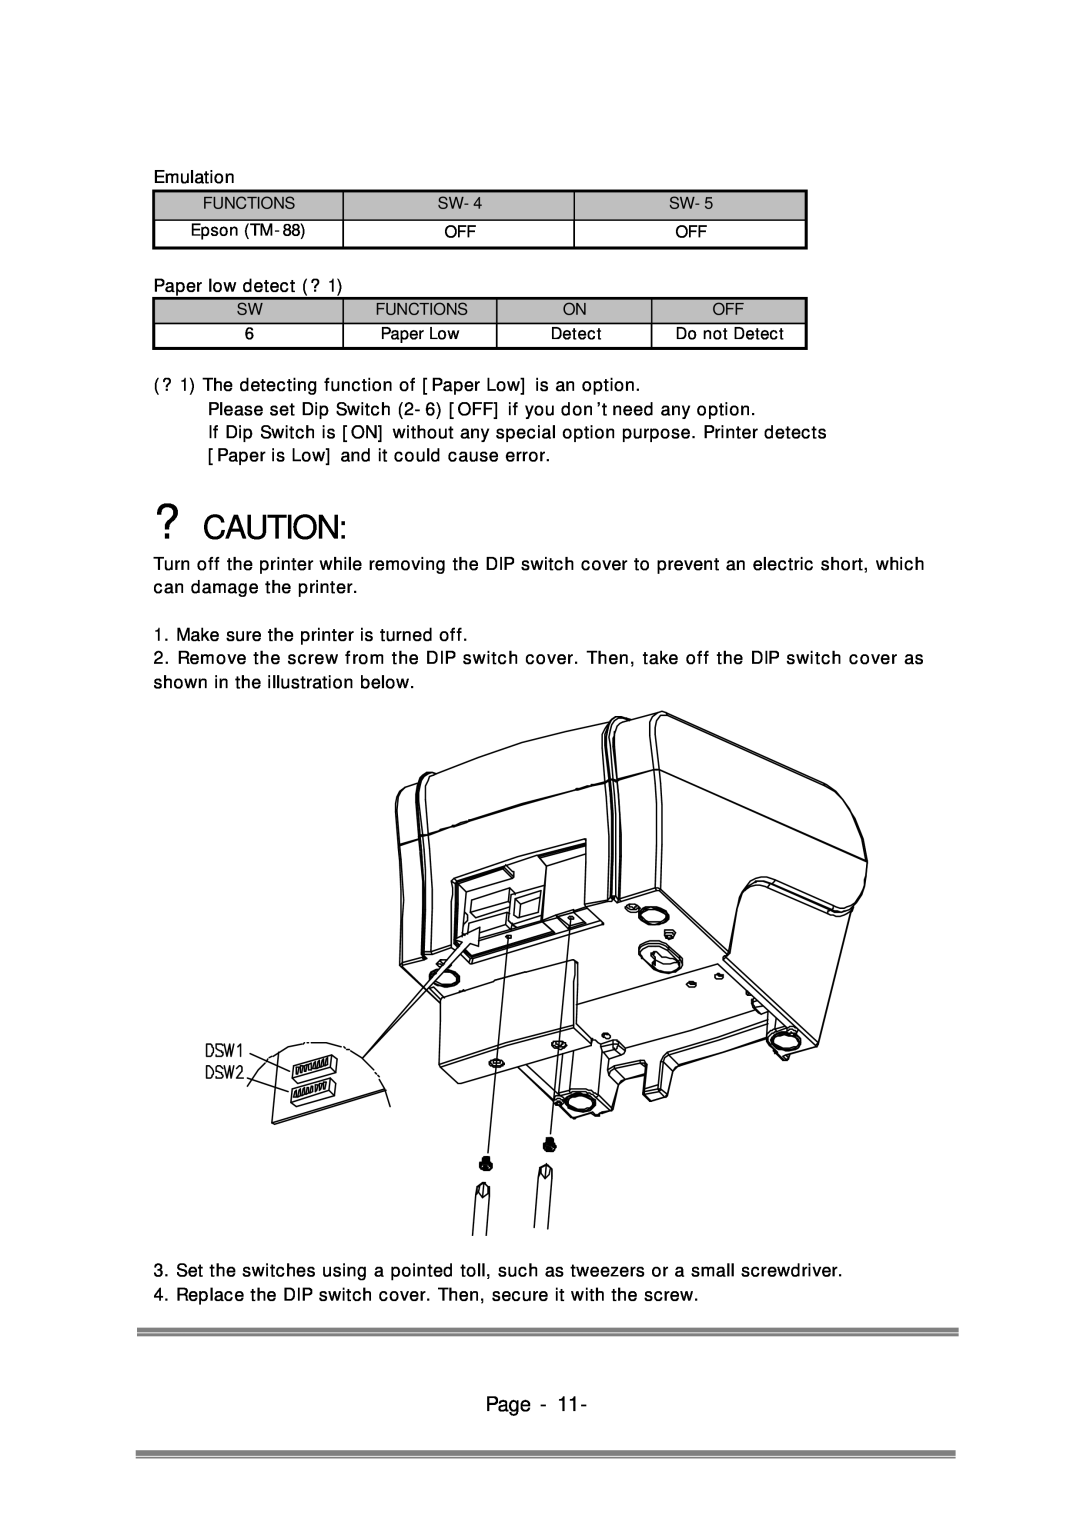 Epson RP-300, RP-310 user manual ? Caution, Page 